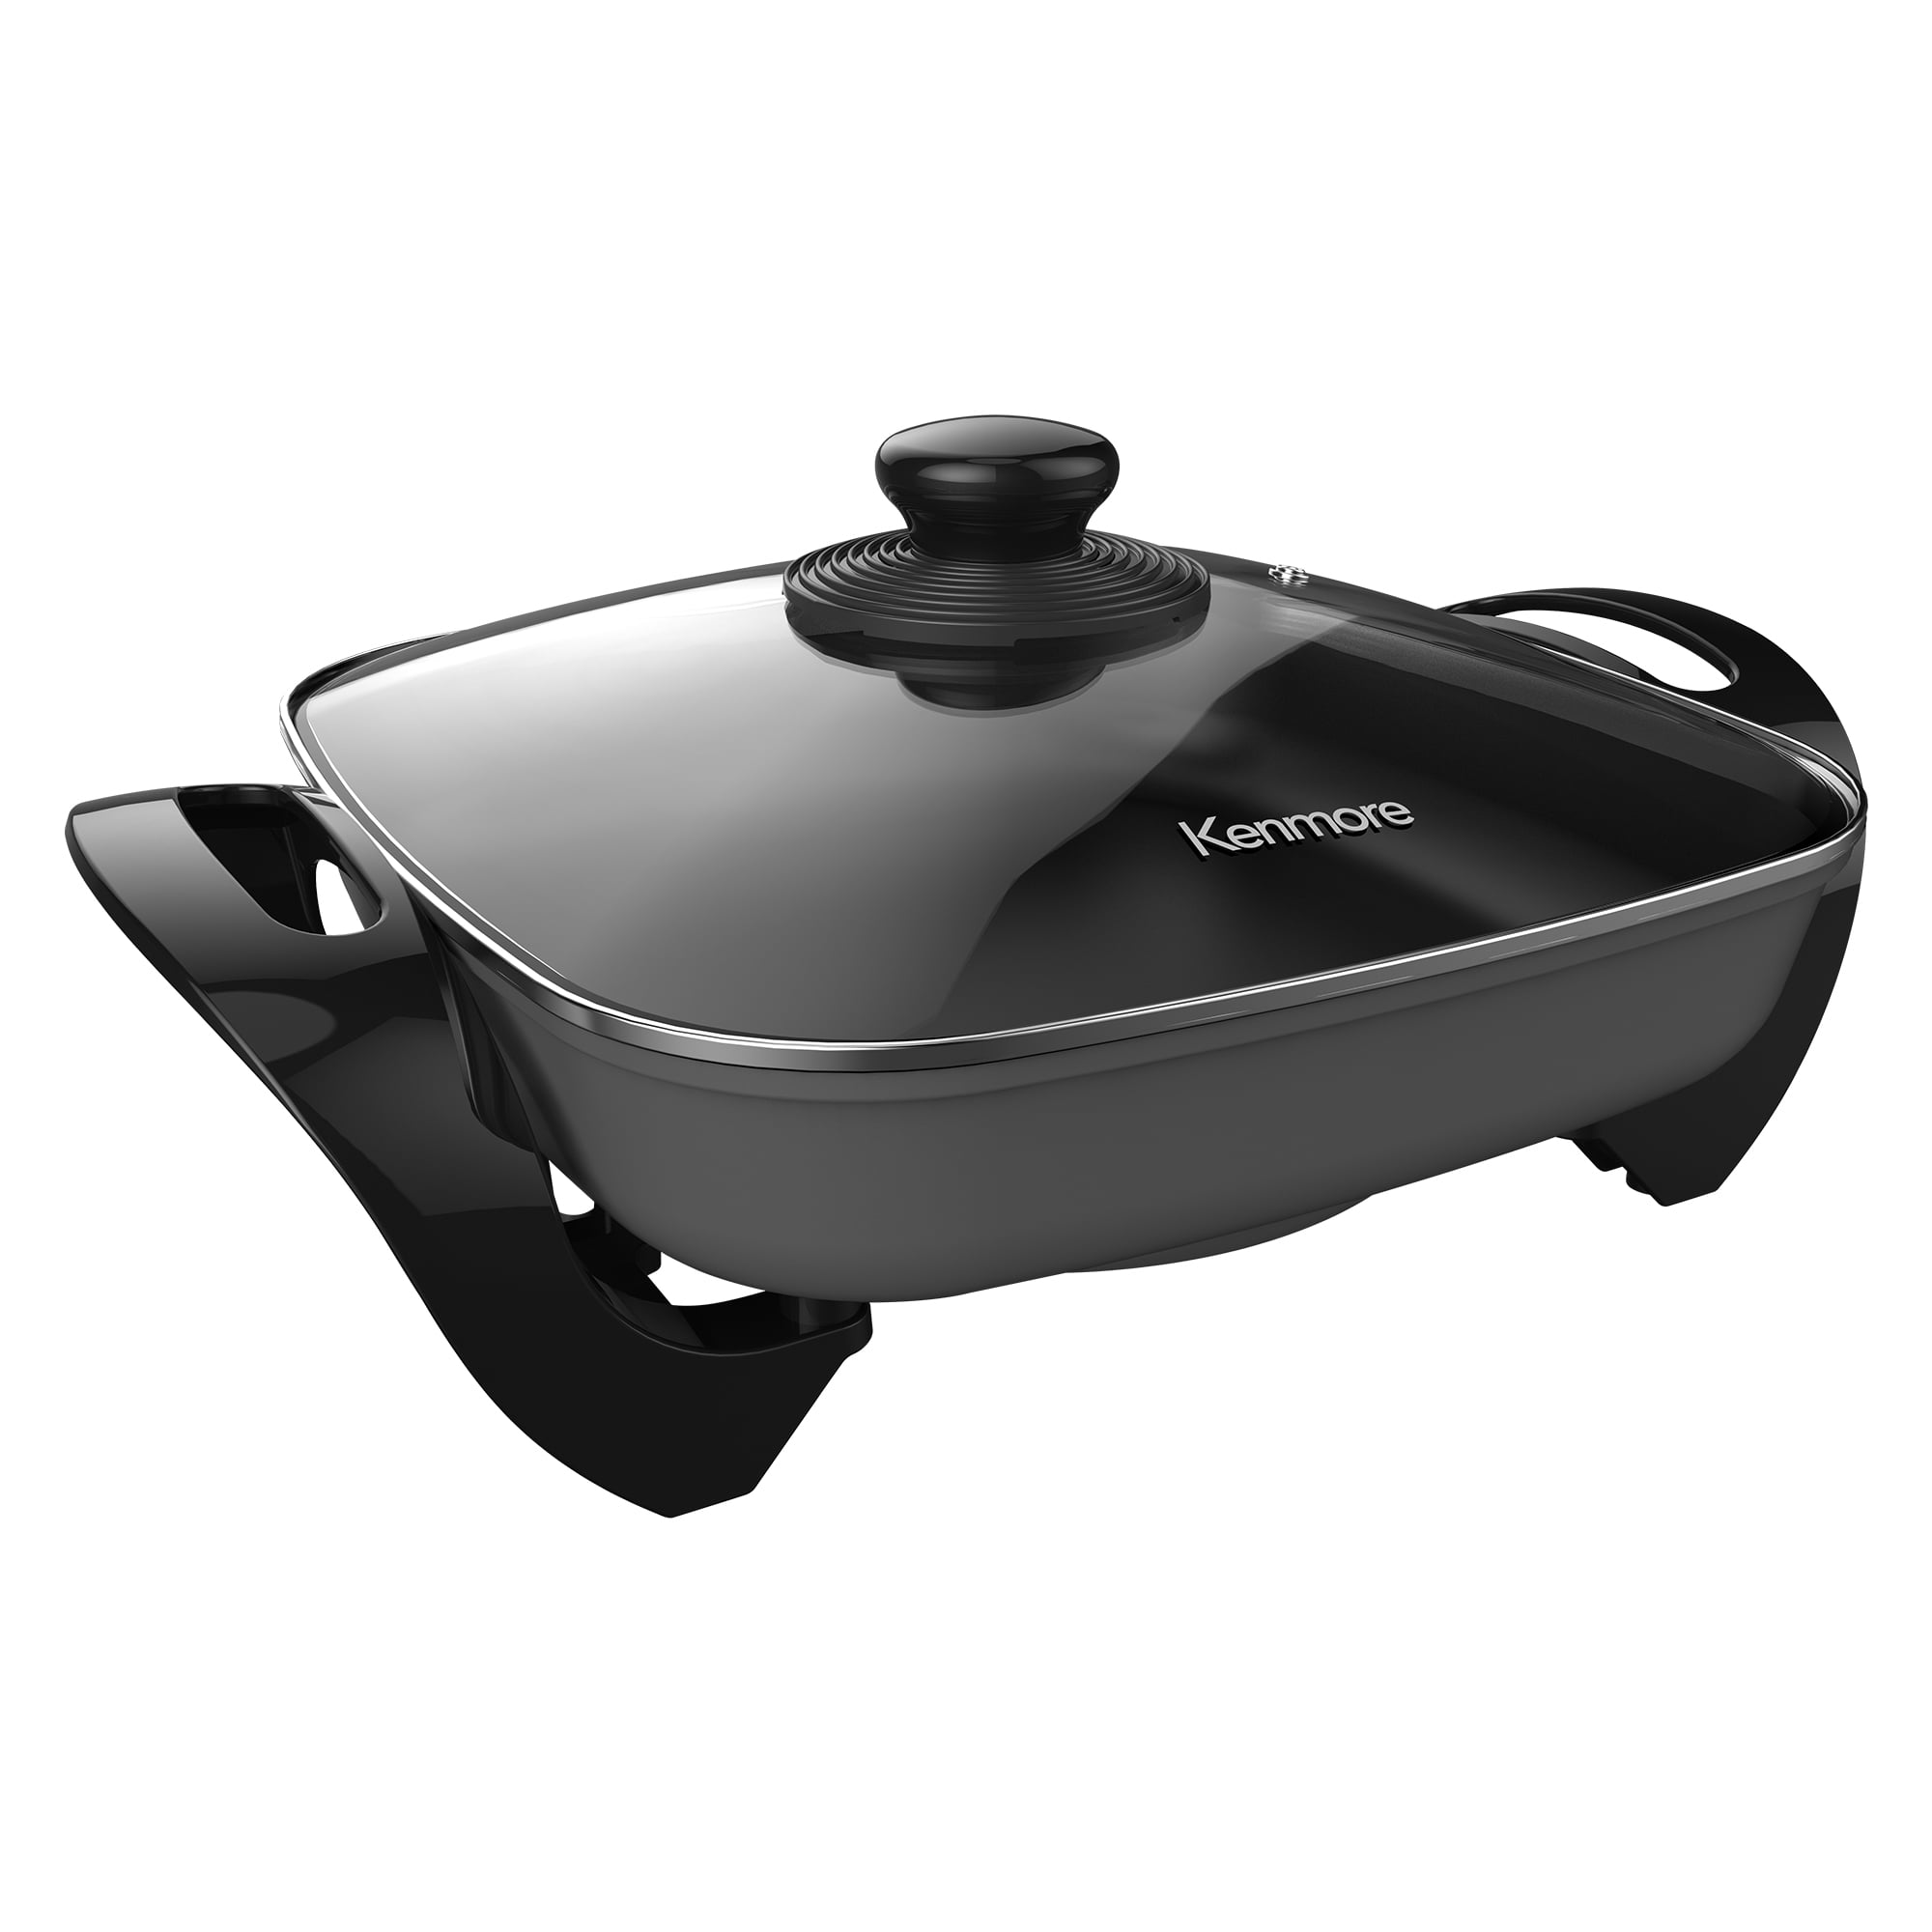 Kenmore Non-Stick Electric Skillet with Glass Lid 12x12 inch Black and Grey  